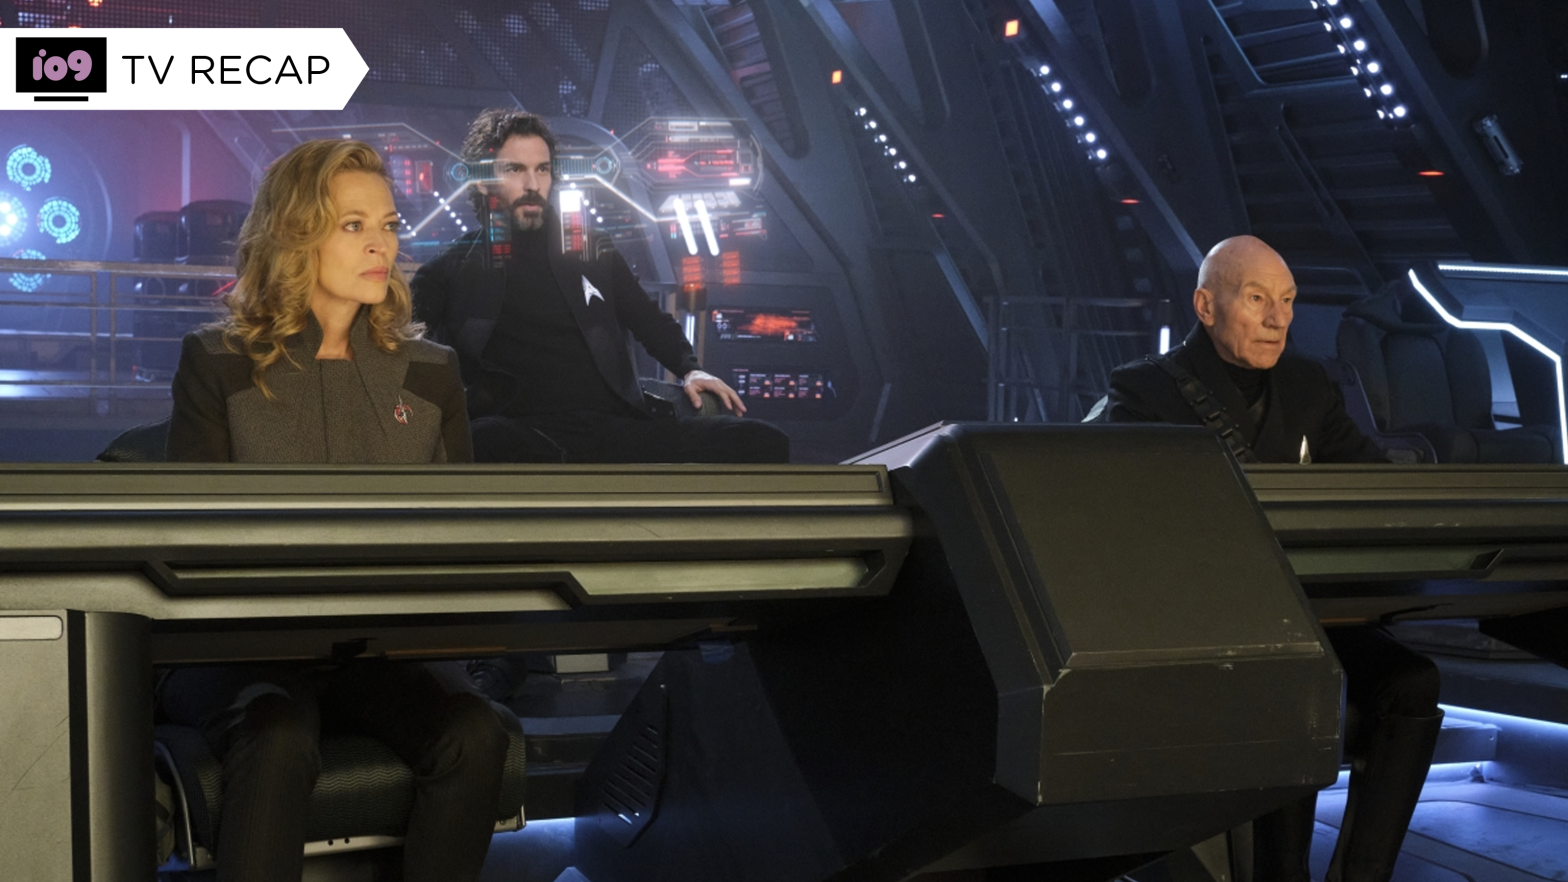 Team Picard gets ready for a bumpy ride to 2024. (Image: Paramount)